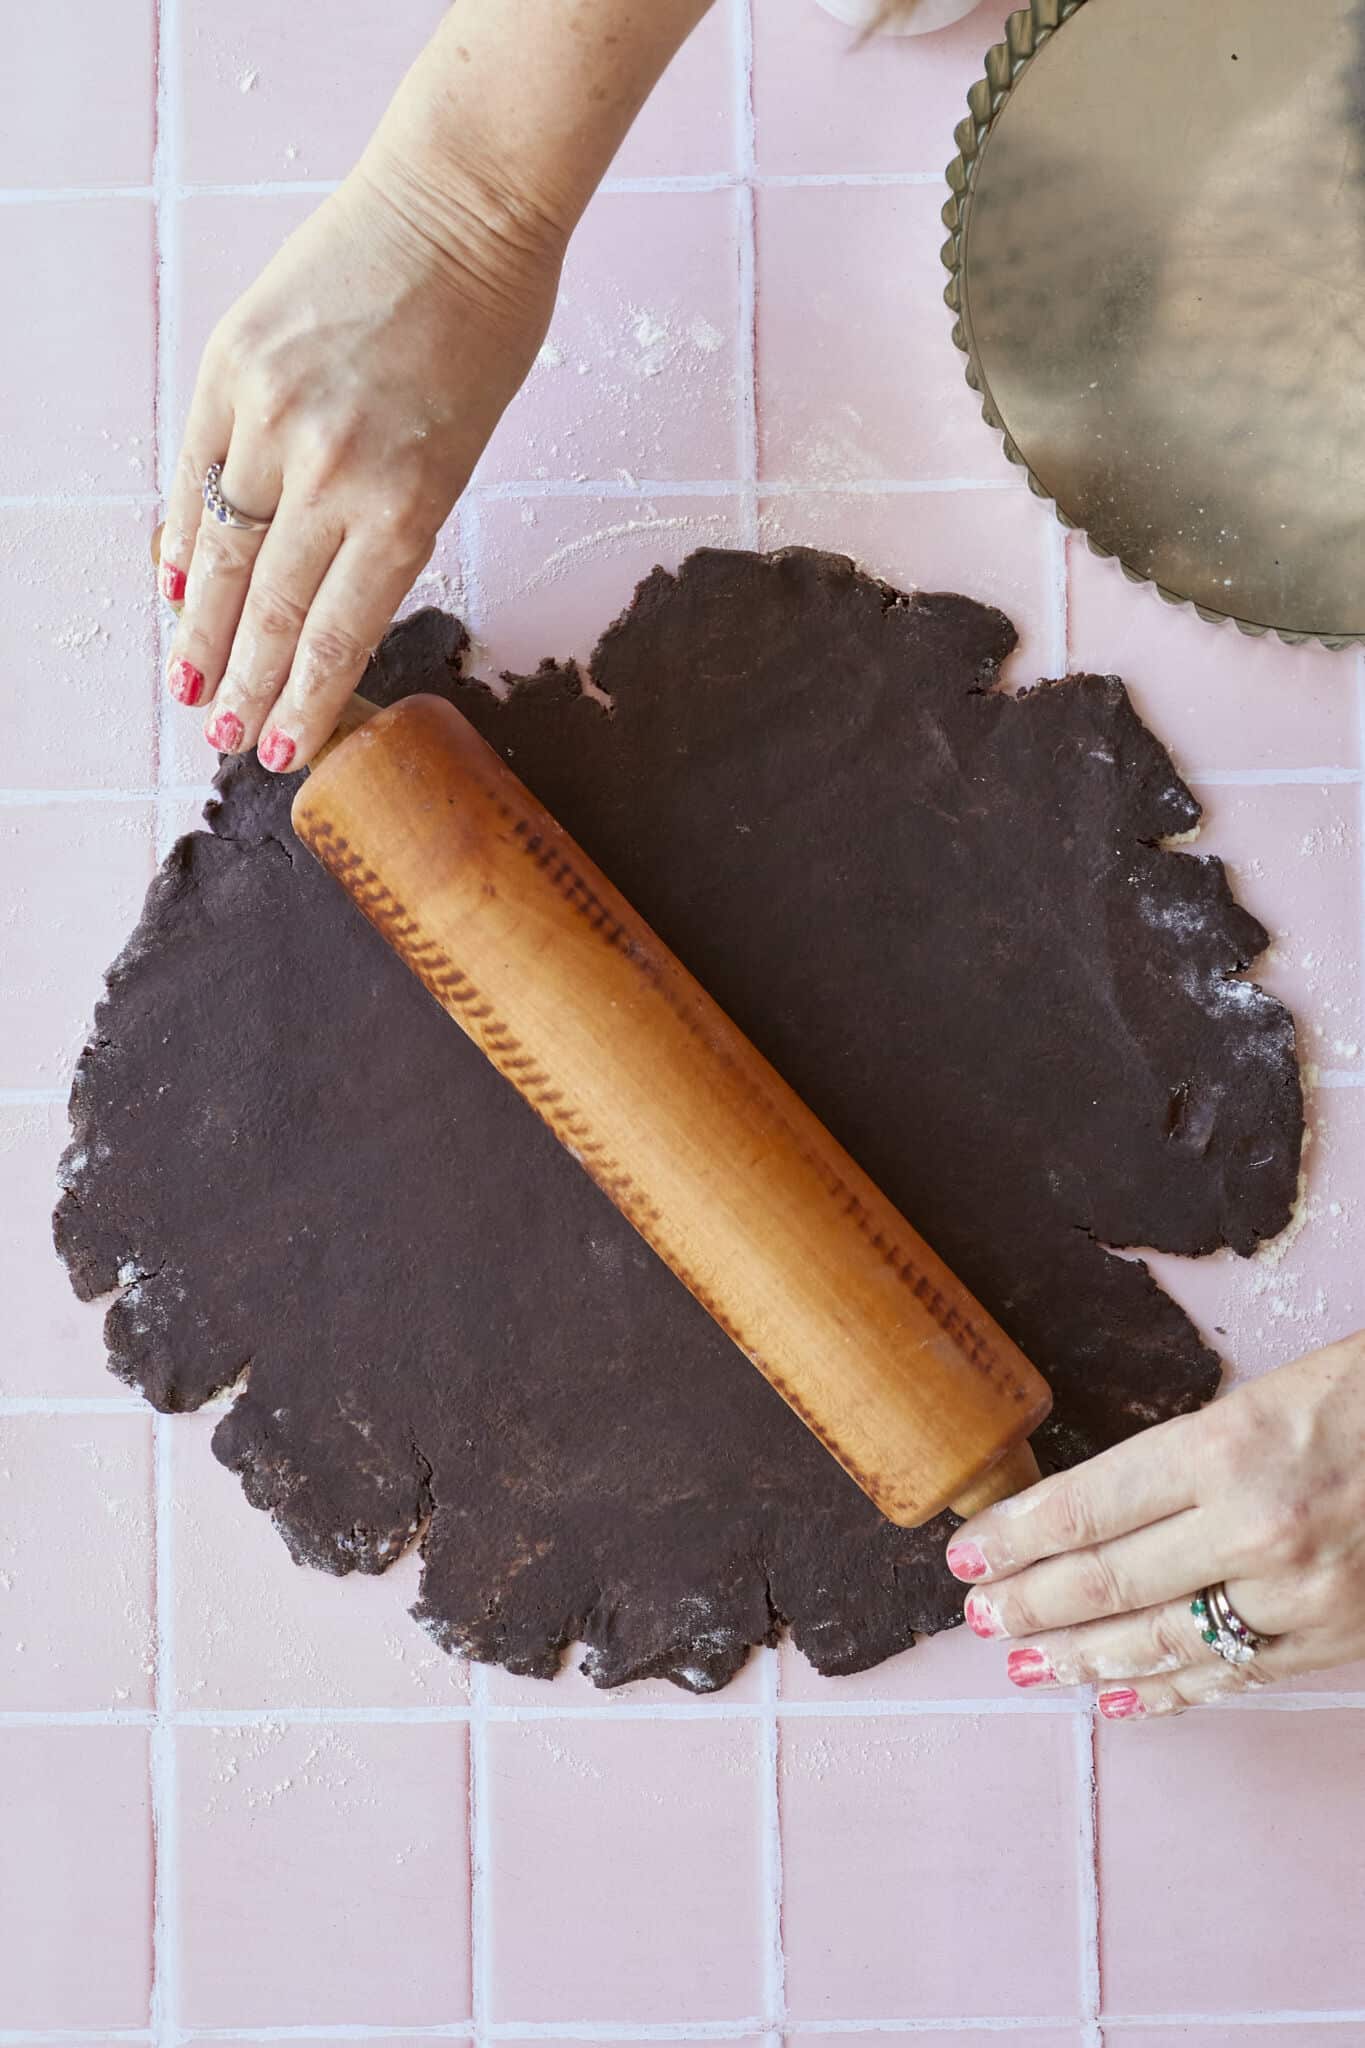 Step-by-step instruction on How to Make Chocolate Pastry: rolling out the pastry dough into a round disc. 